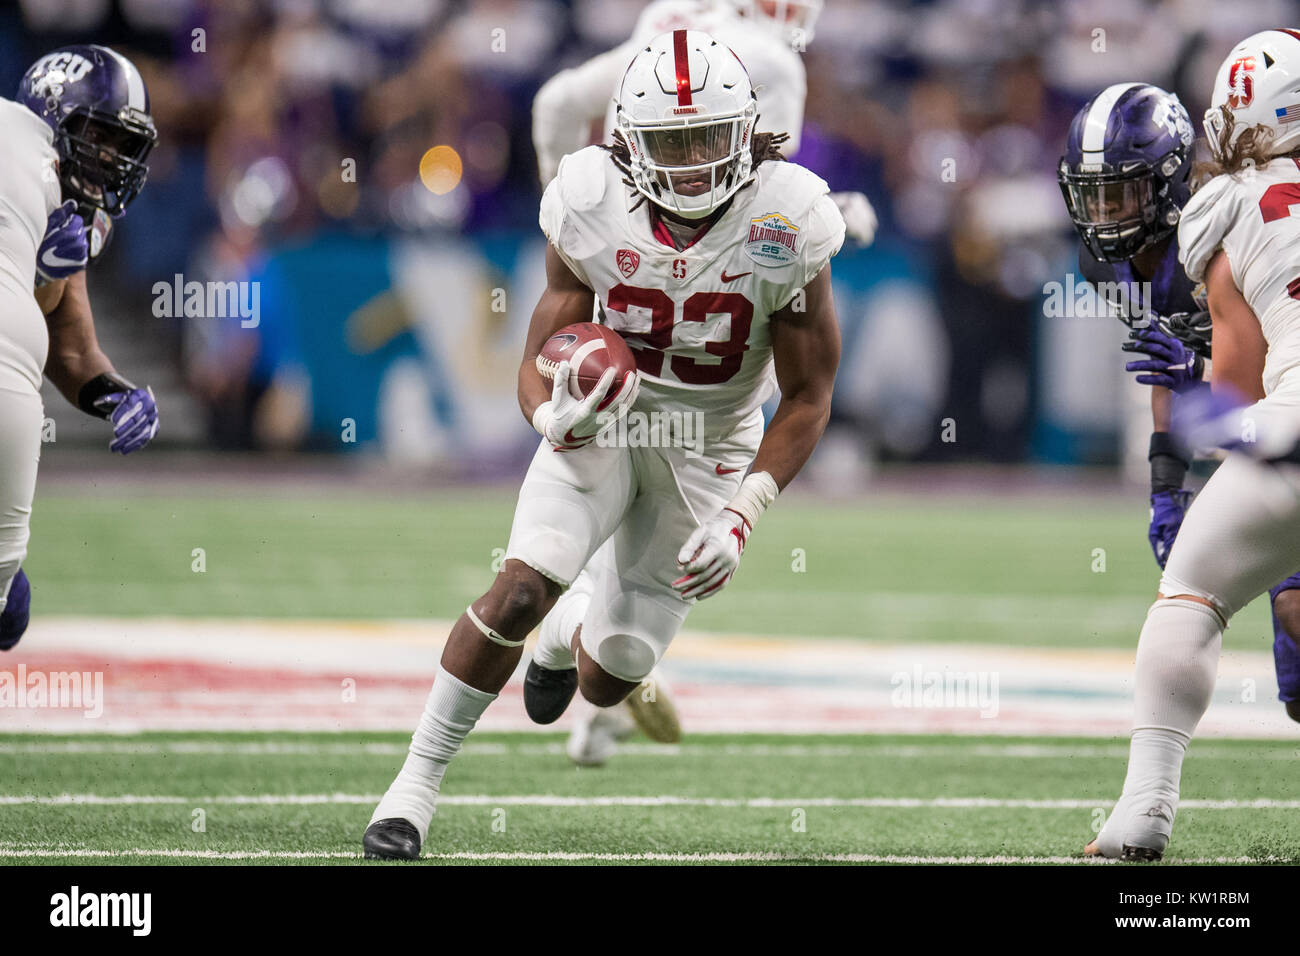 San Antonio, TX, USA. 28th Dec, 2017. Stanford Cardinal running back Trevor Speights (23) carries the ball during the 2nd quarter of the Alamo Bowl NCAA football game between the TCU Horned Frogs and the Stanford Cardinal at the Alamodome in San Antonio, TX. Credit: Cal Sport Media/Alamy Live News Stock Photo